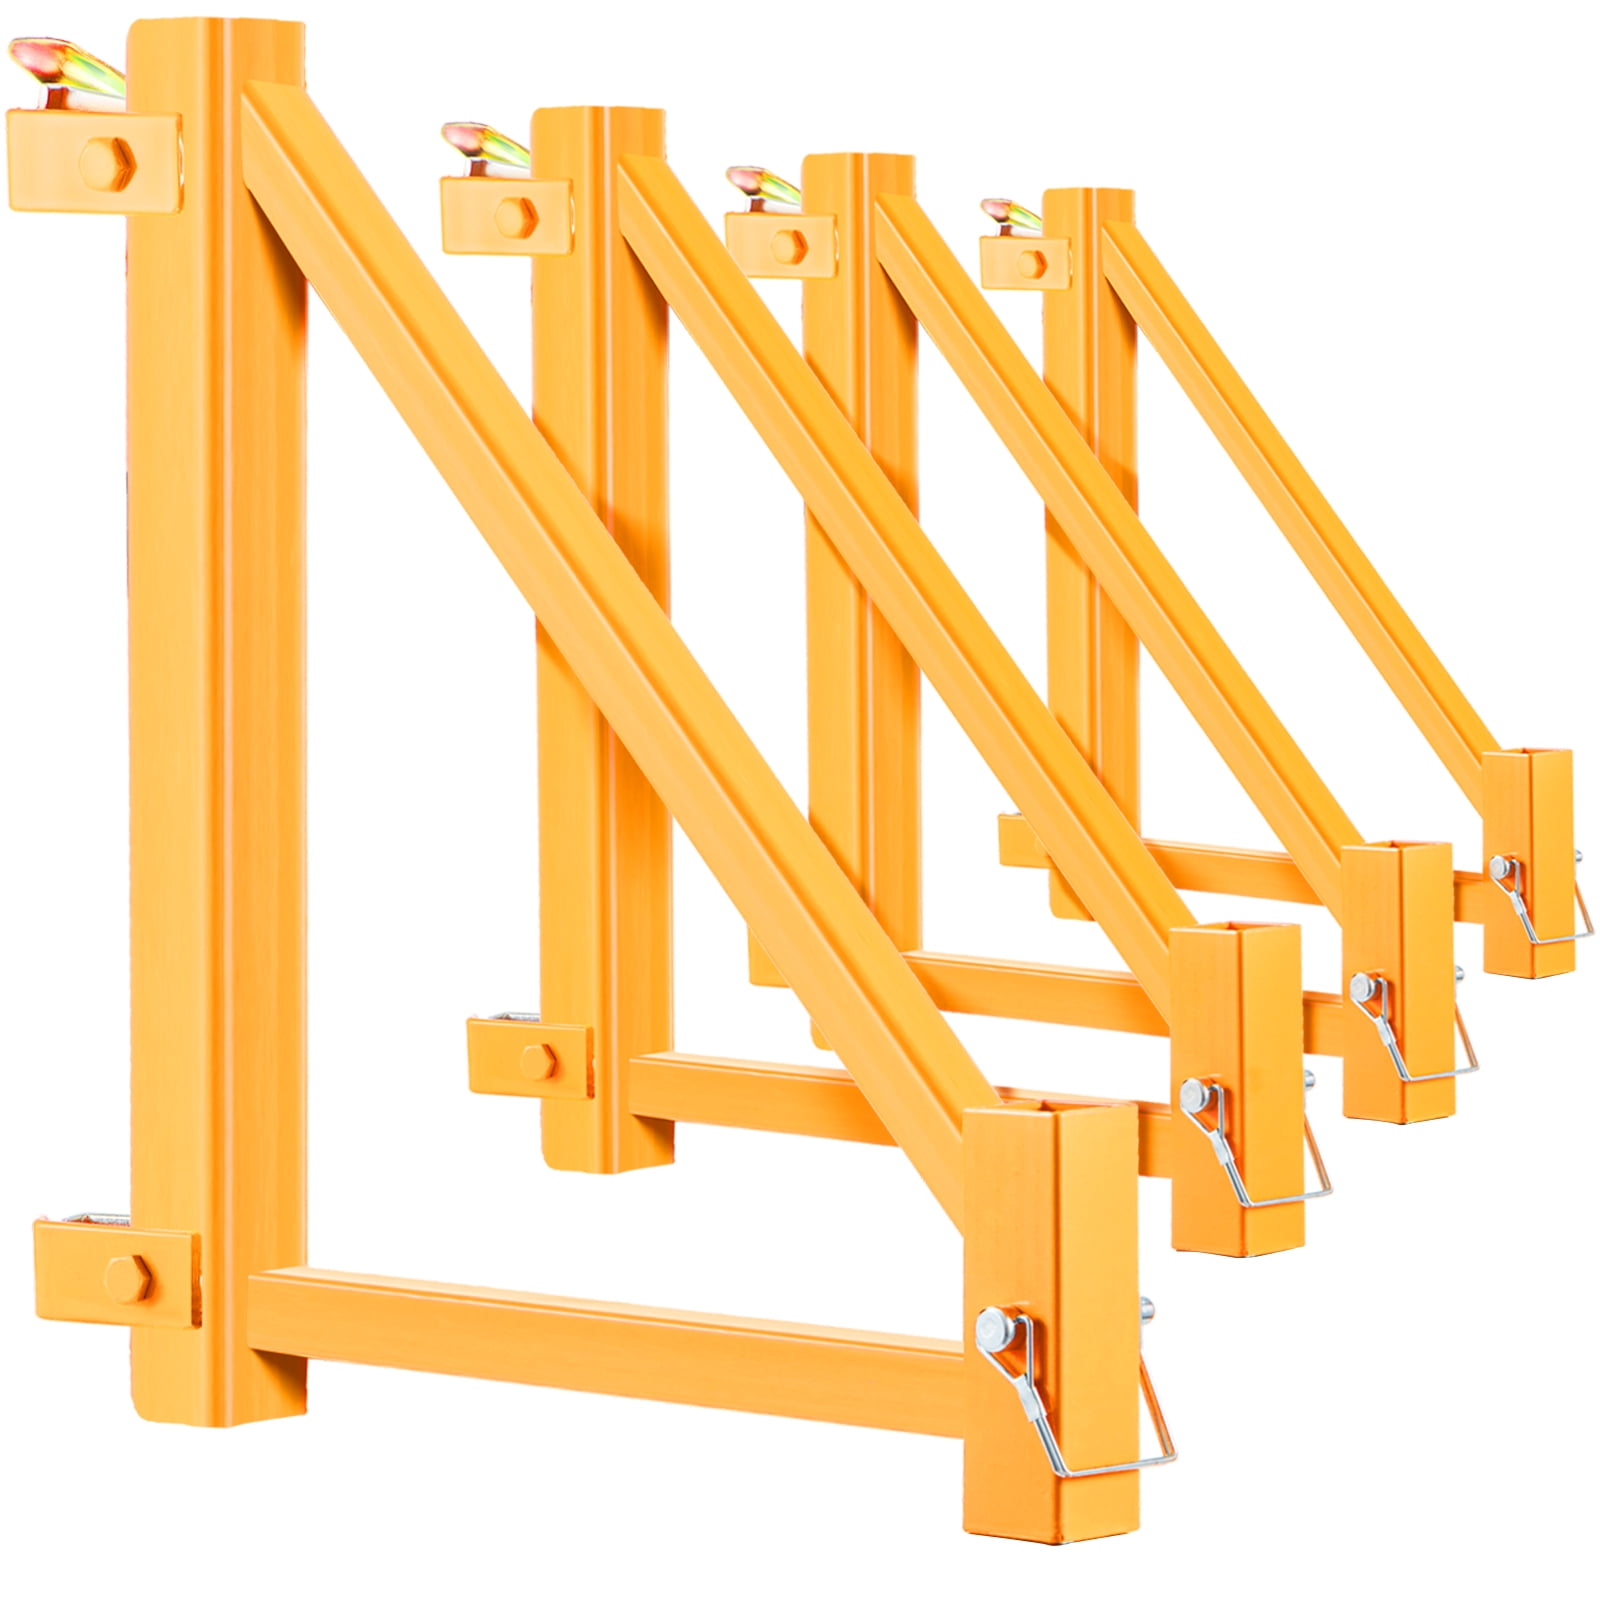 Details about   SCAFFOLDING 18FT SET W/HATCH PLATFORMS Outriggers Painting Drywall Guard Rail 